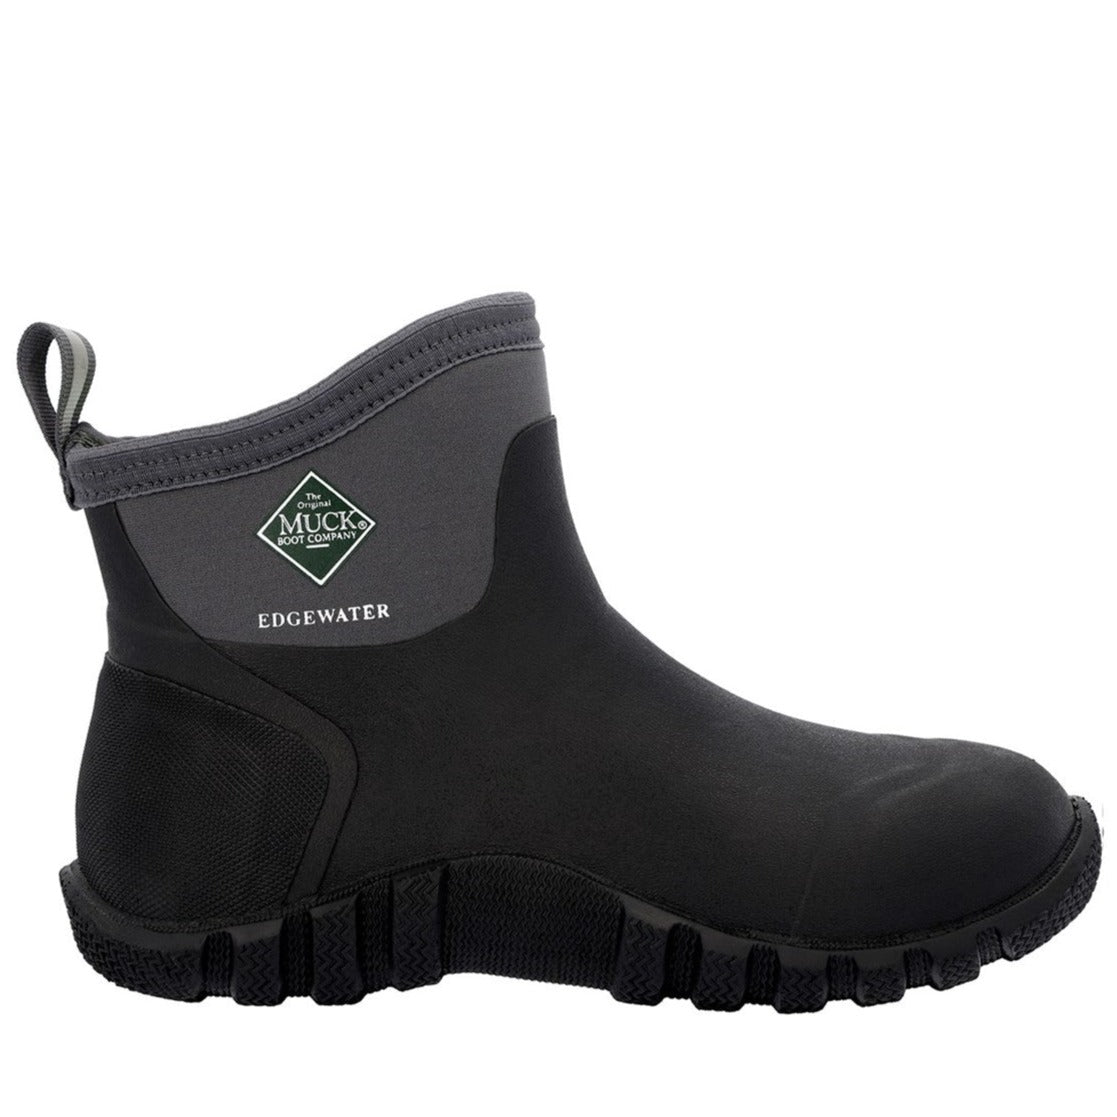 Muck Boots Edgewater Classic Ankle Boot